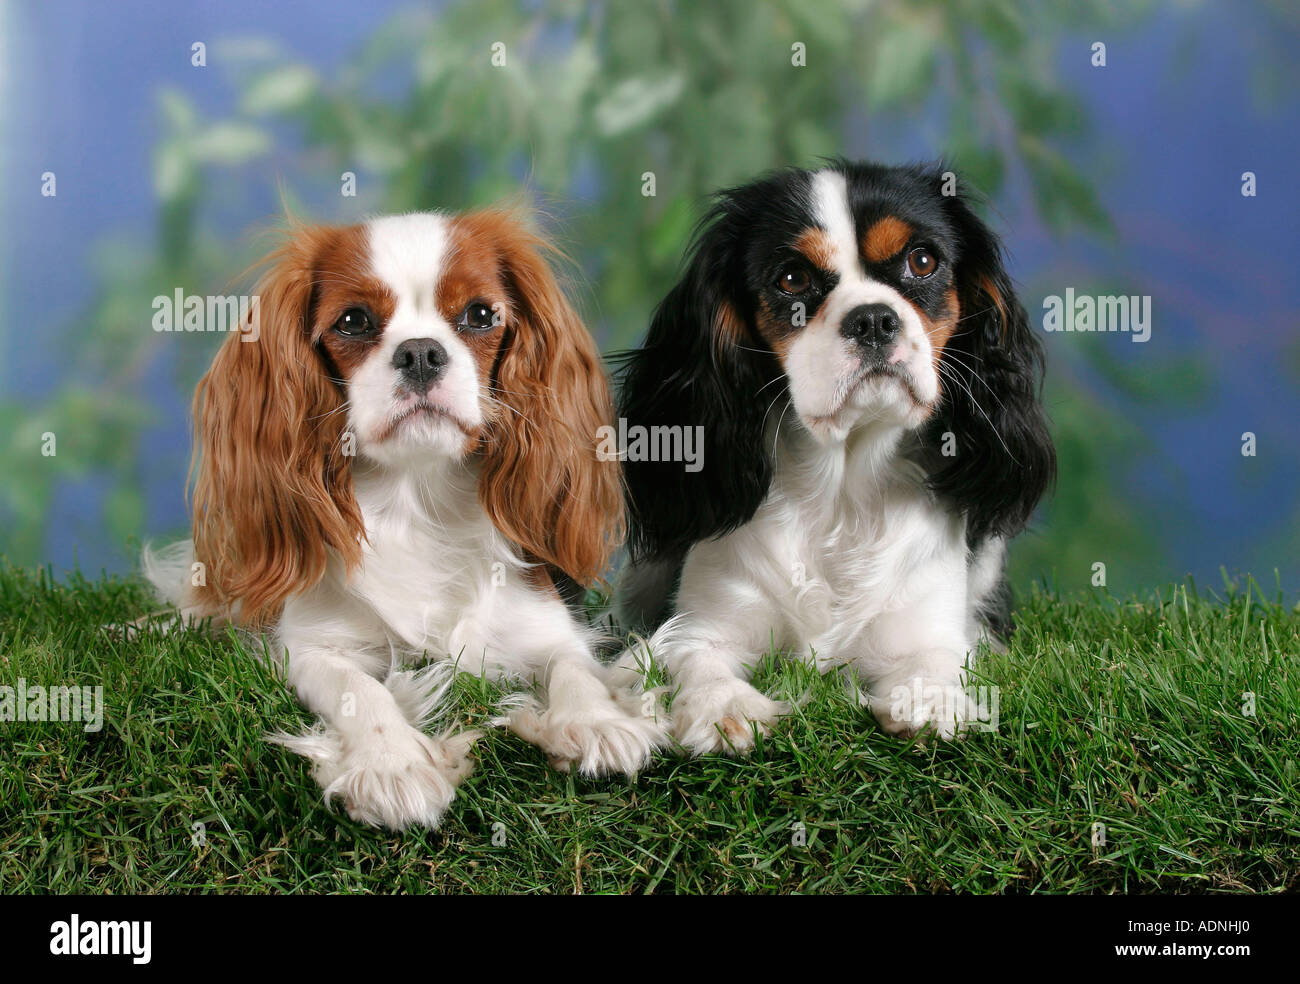 Cavalier King Charles Spaniel, Blenheim and tricolor Stock Photo - Alamy